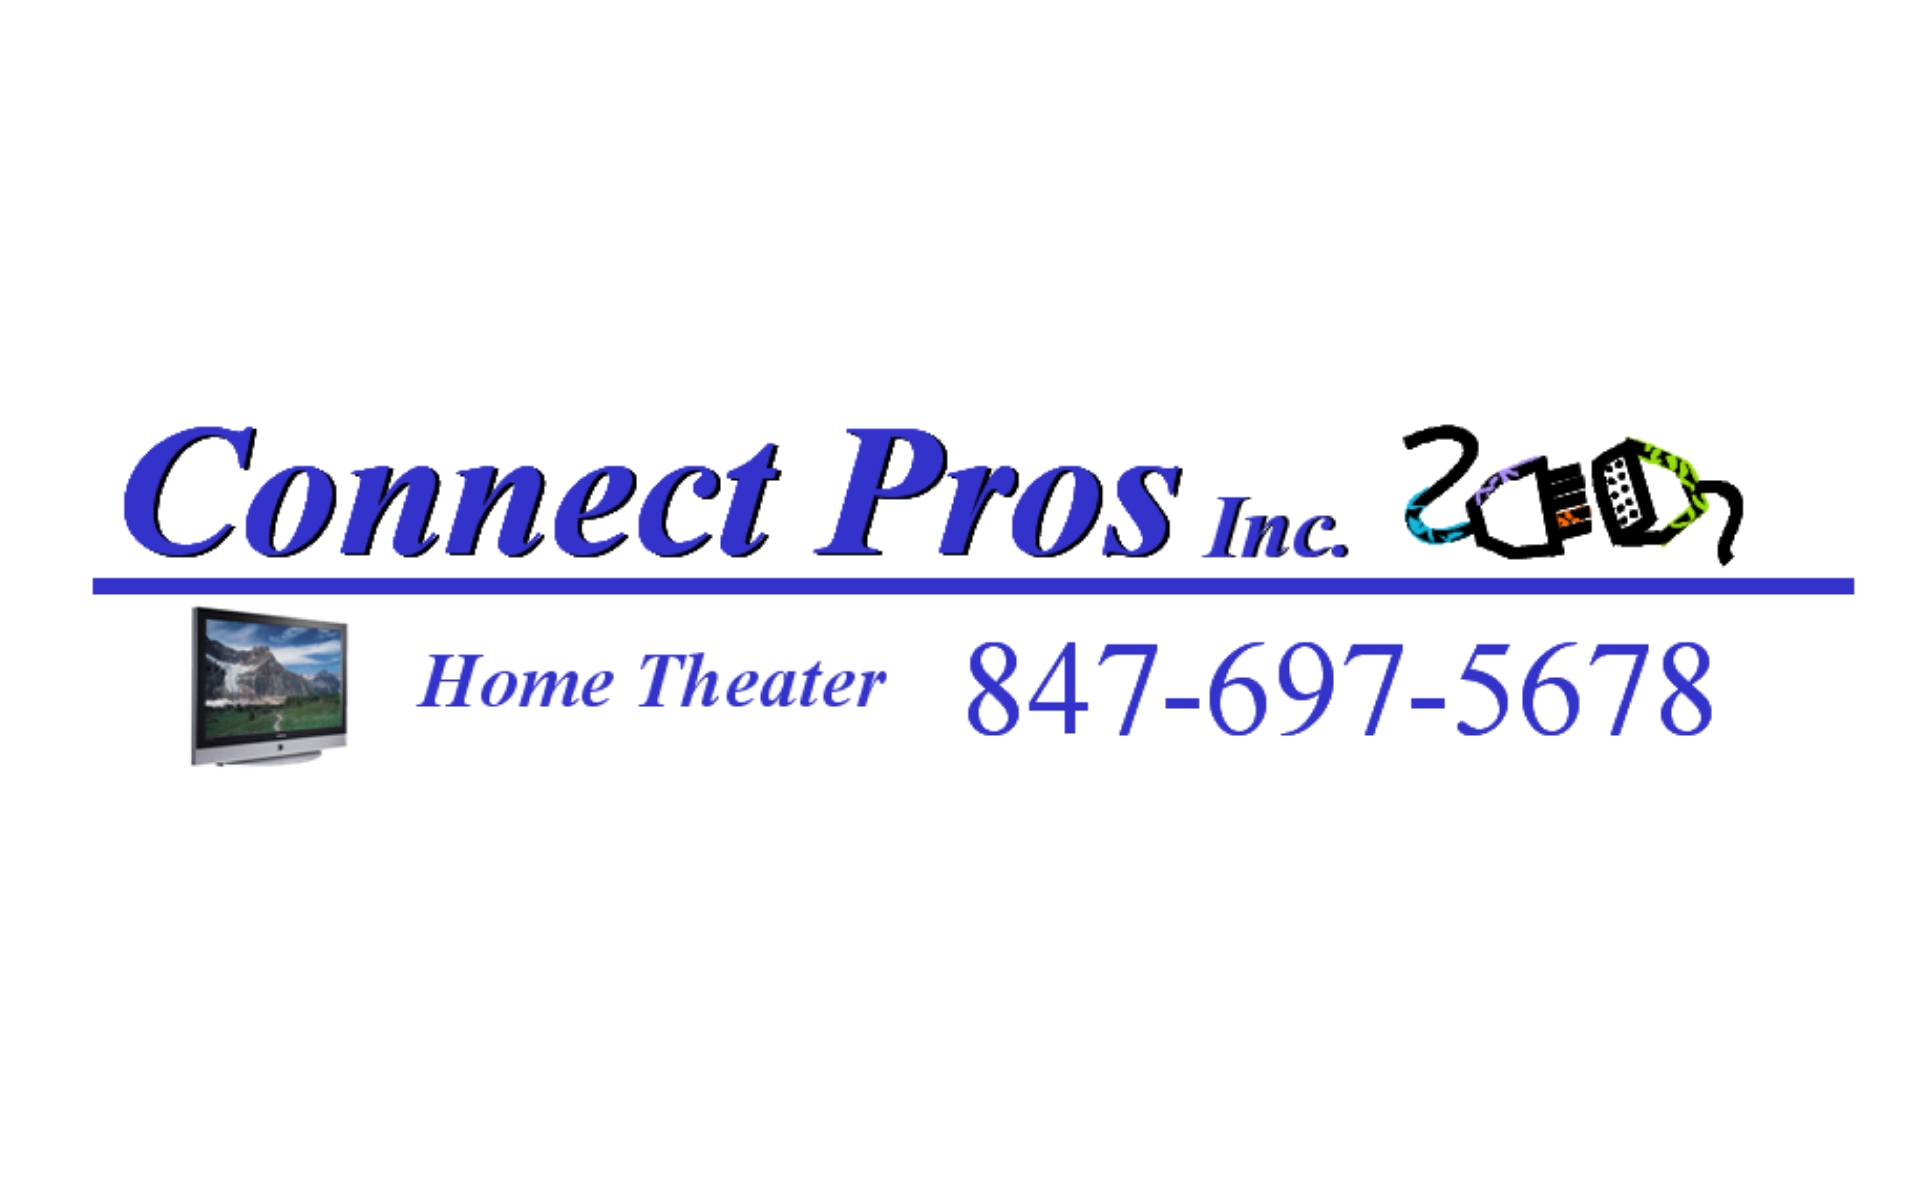 Home Theater logo